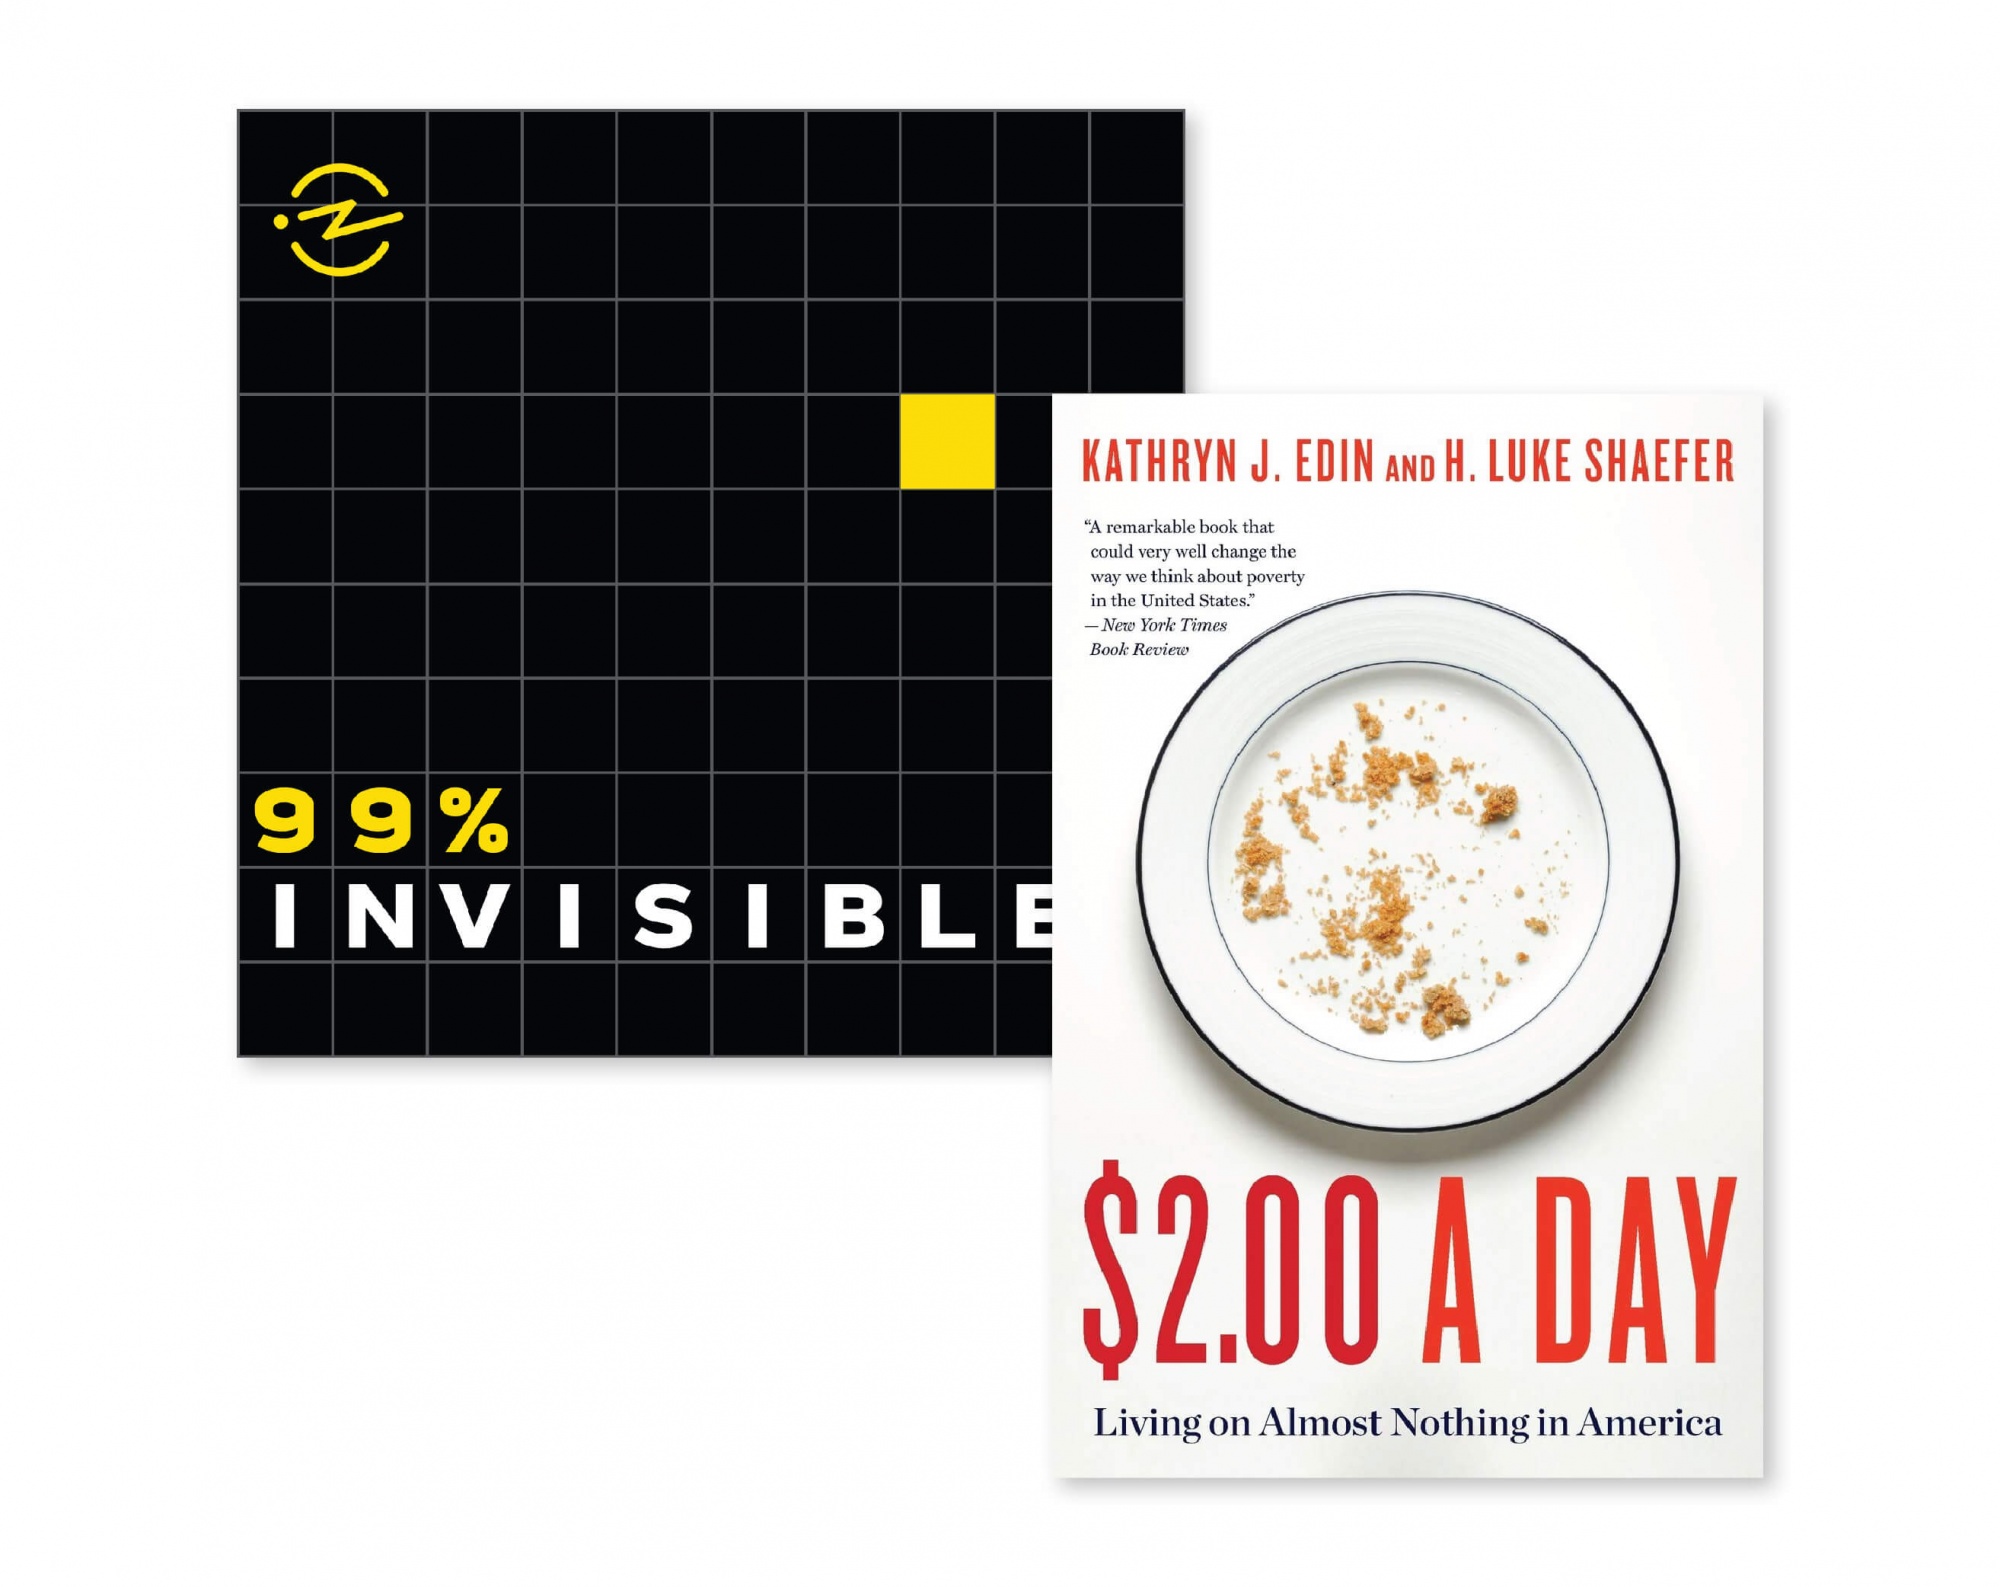 99% Invisible and $2.00 a Day: Living on Almost Nothing in America